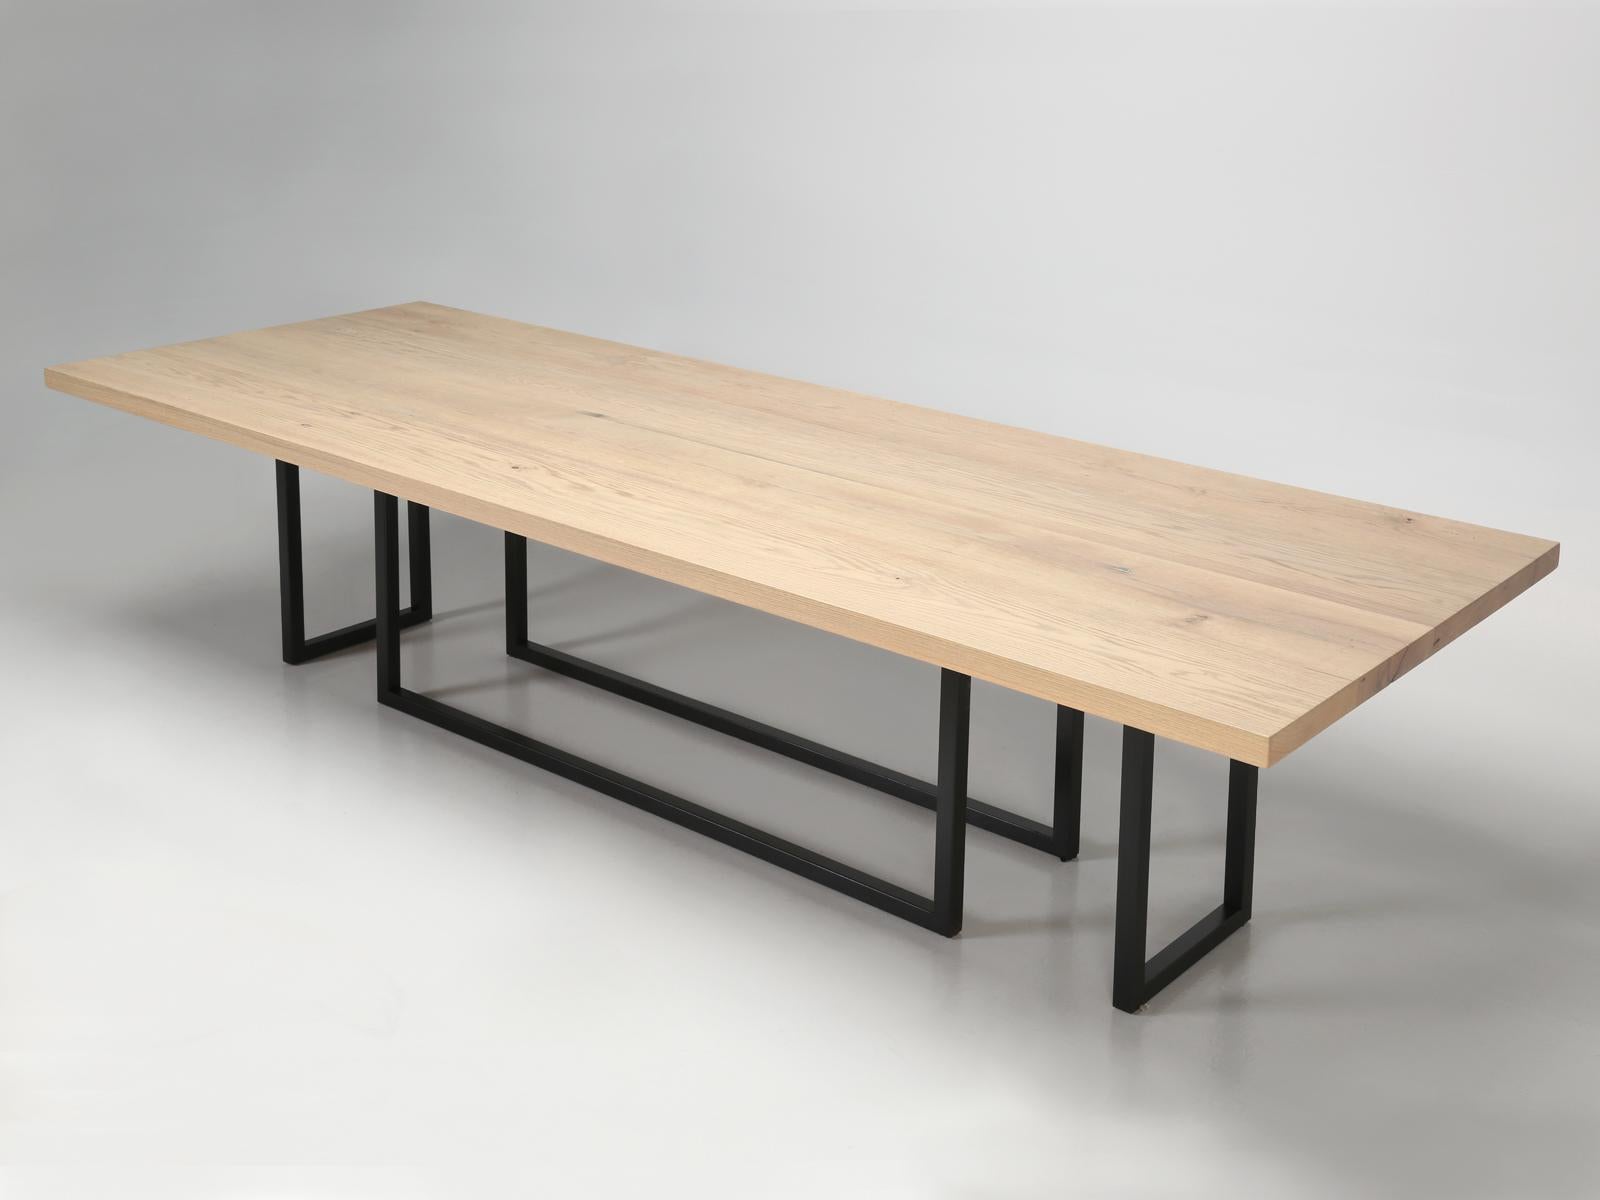 Pending availability of reclaimed oak, we can duplicate this extra thick, reclaimed white oak top, where each board measures a full 12” in width and generally run over 2” in thickness. Our old plank steel and oak dining table, is available in any